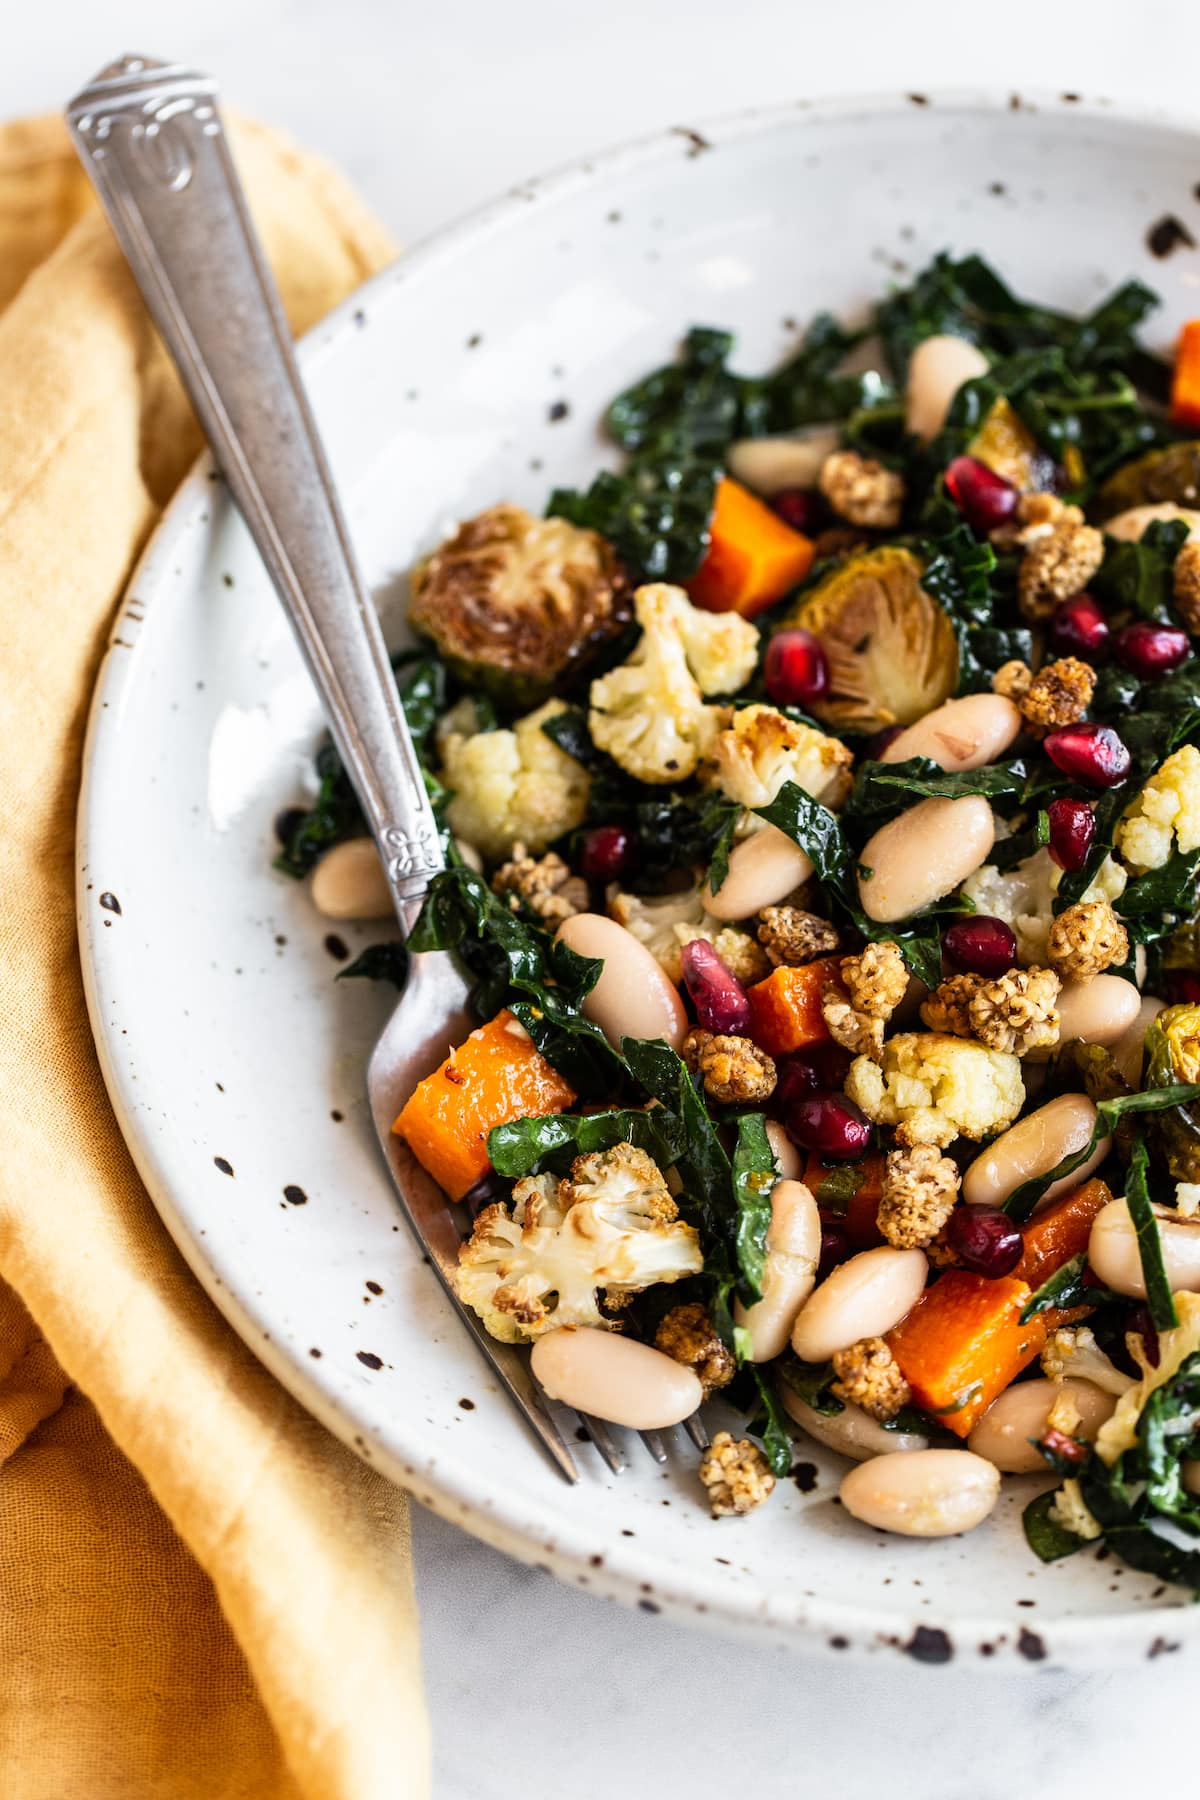 Bowl and fork with a roasted vegetable kale salad.